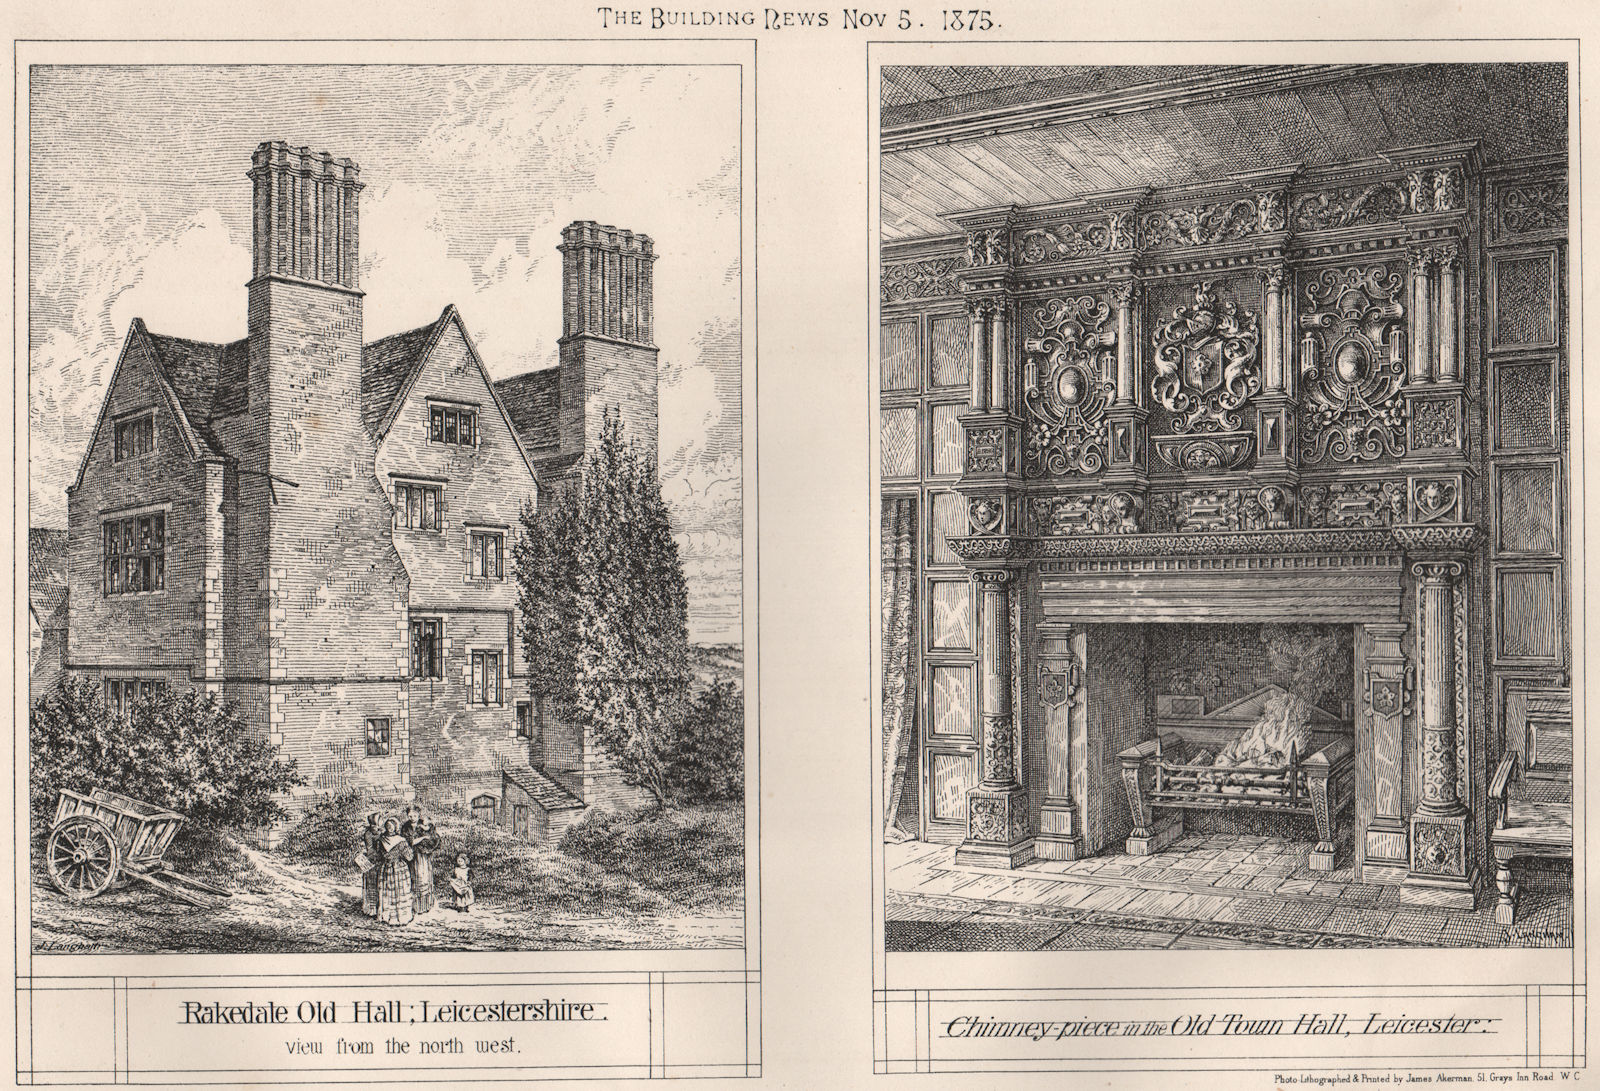 Associate Product Rakedale Old Hall, Leicestershire. Old Town Hall chimney, Leicester 1875 print